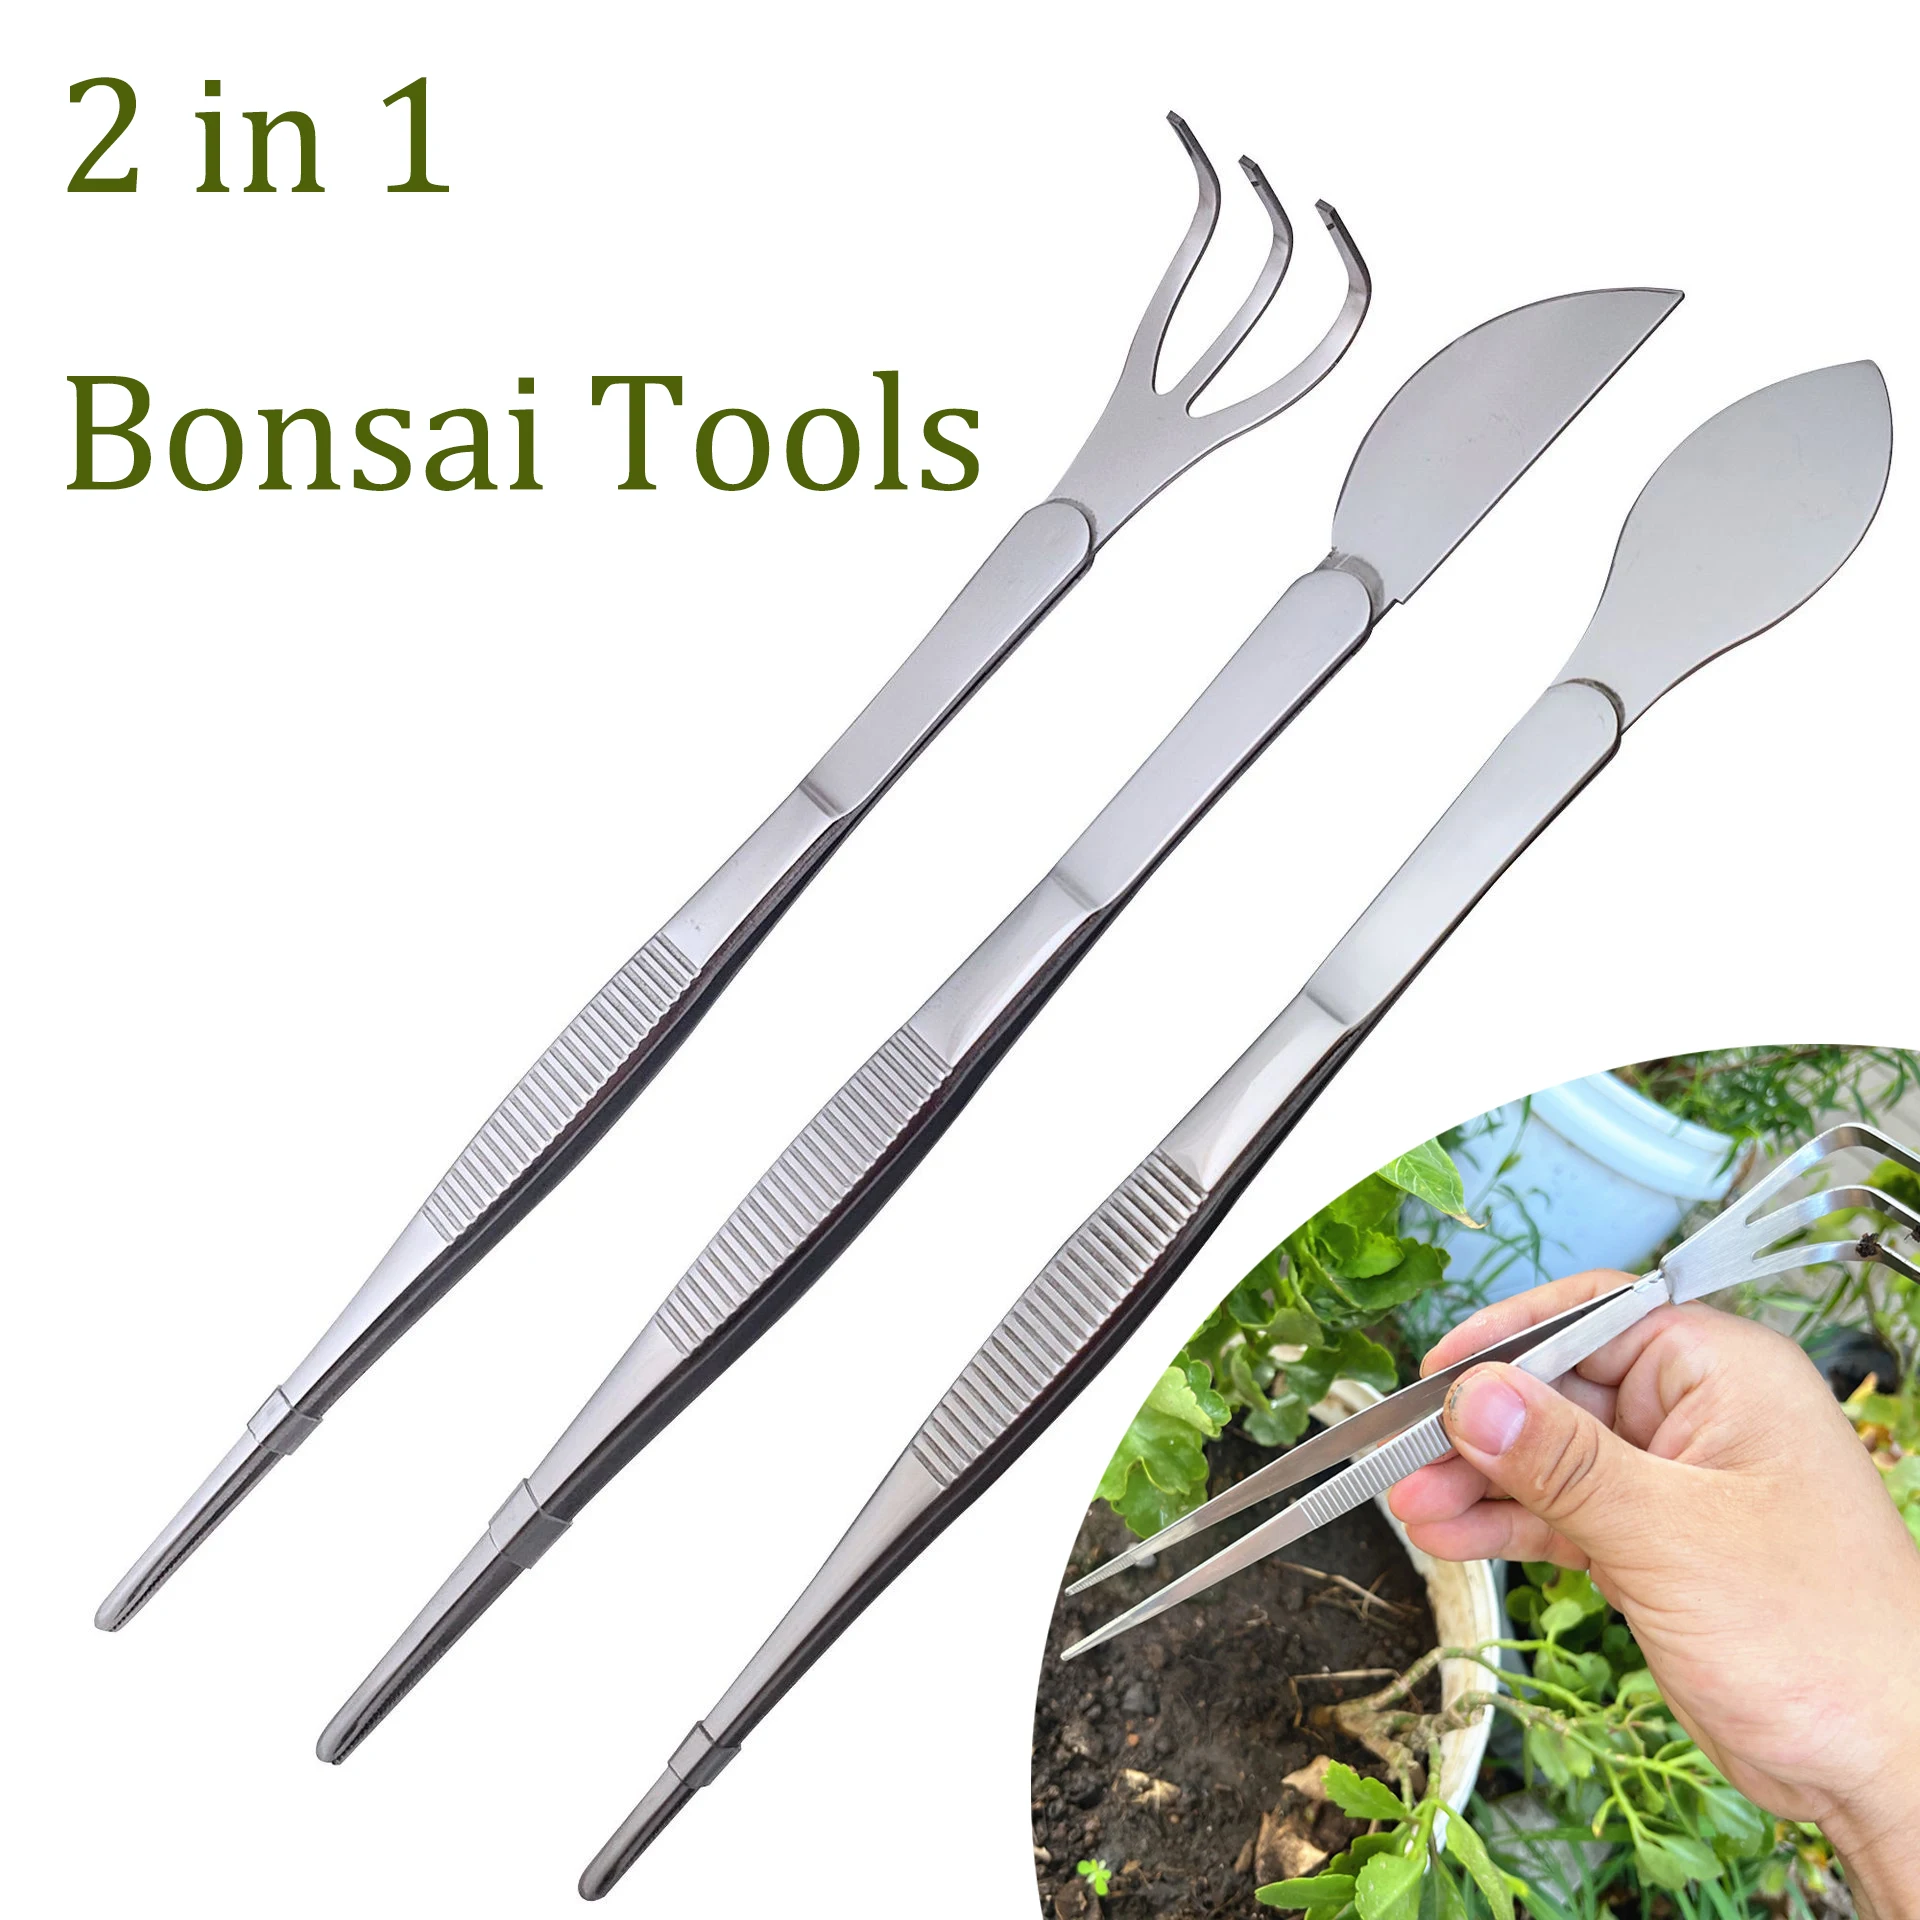 

With Tool With Soil Steel Ergonomical Succulents Rake For Tweezers 304 Stainless Bonsai Farming Root 2-in-1 Crafting Handle